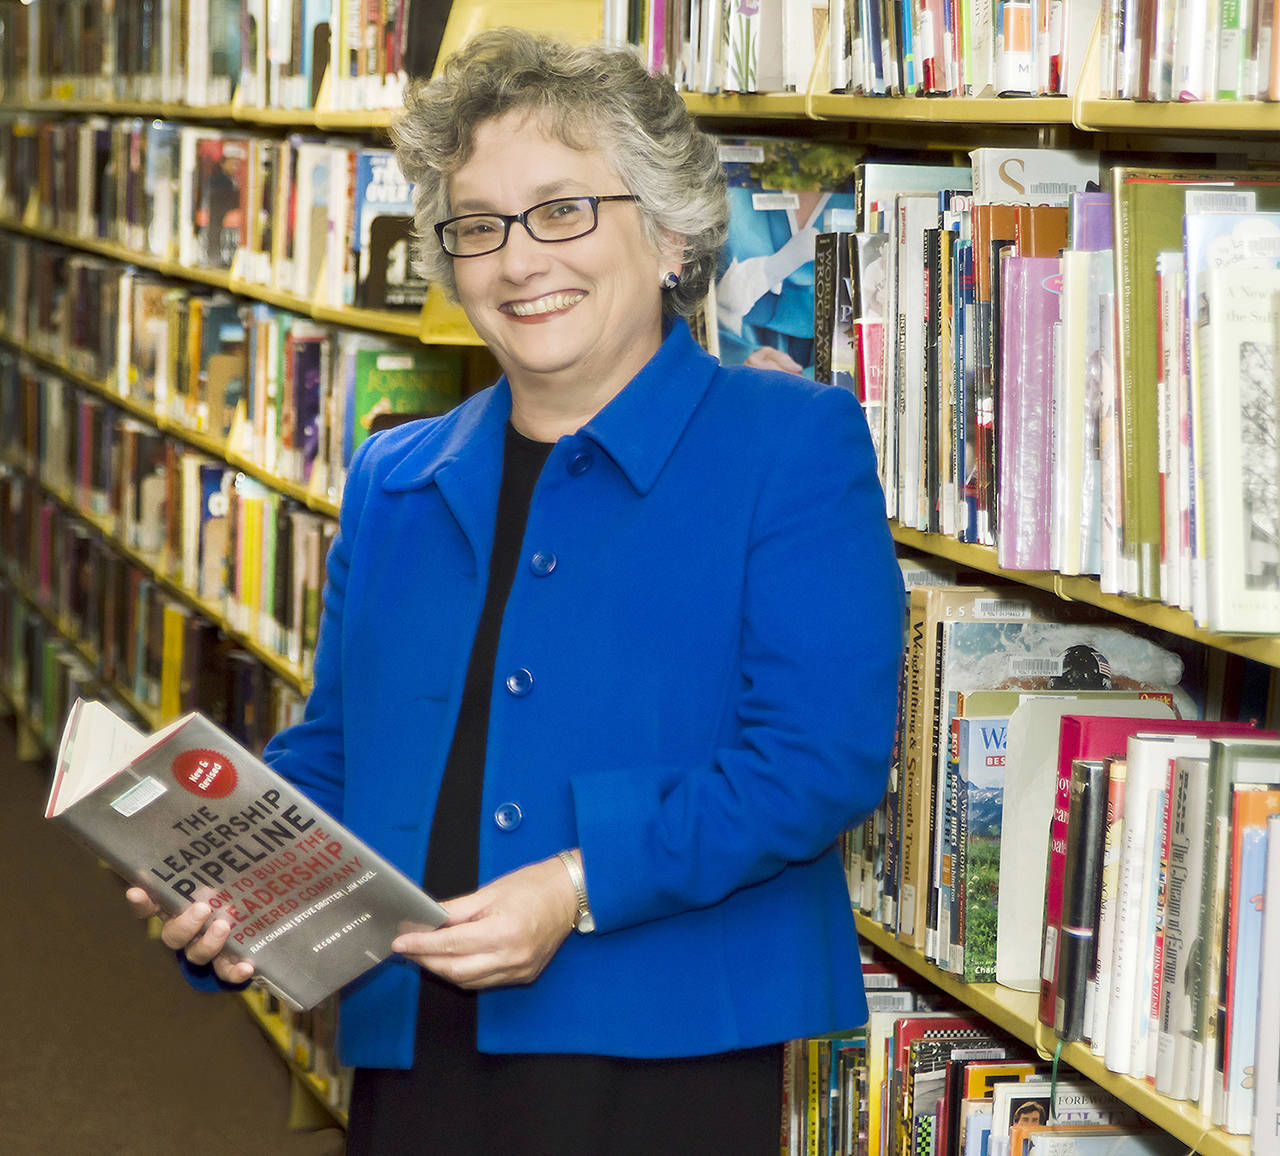 Sno-Isle                                Jonalyn Woolf-Ivory, executive director of Sno-Isle Libraries, will retire in December after more than 30 years with the library district.